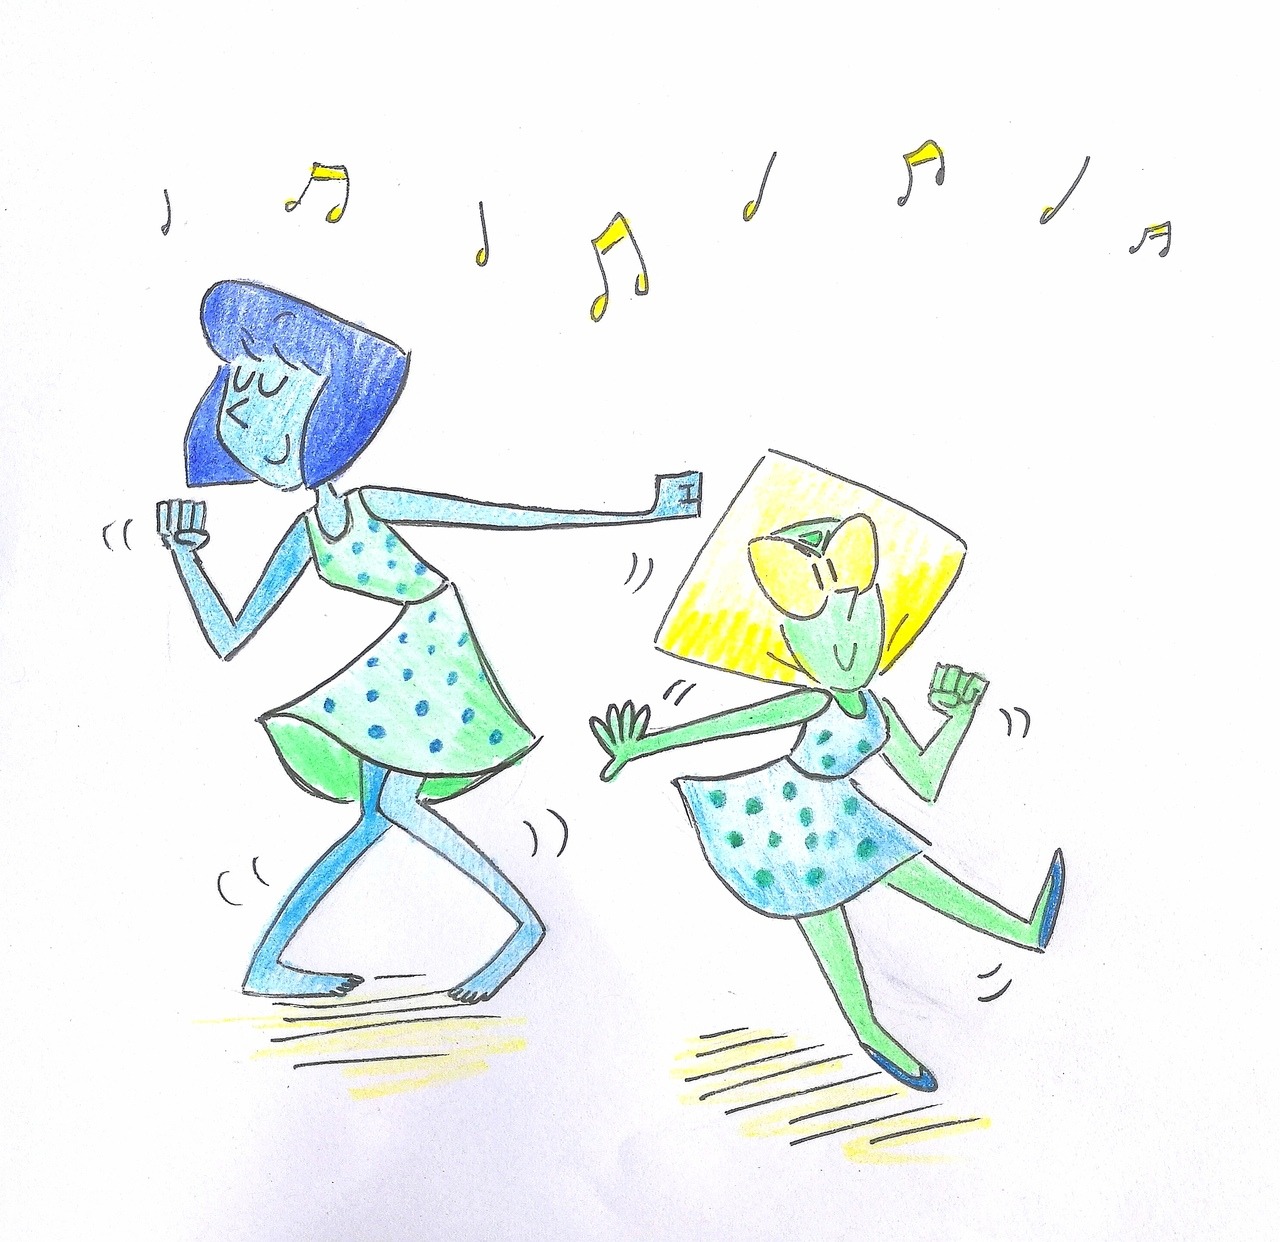 I can't remember who requested this but here's a drawing of Lapis and Peridot dancing that I drew two days ago